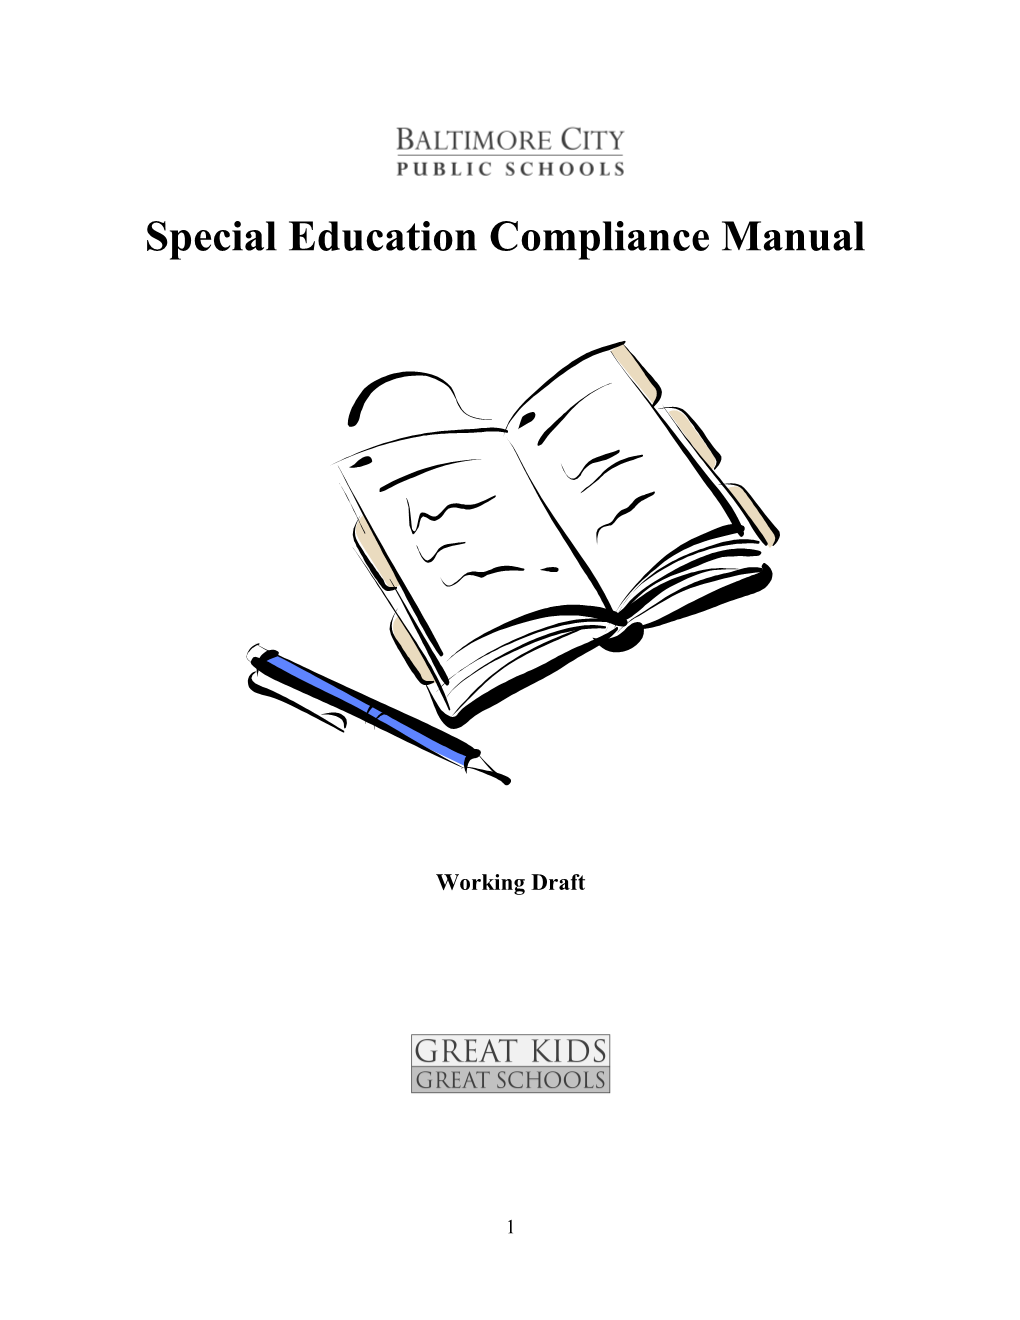 Special Education Compliance Manual